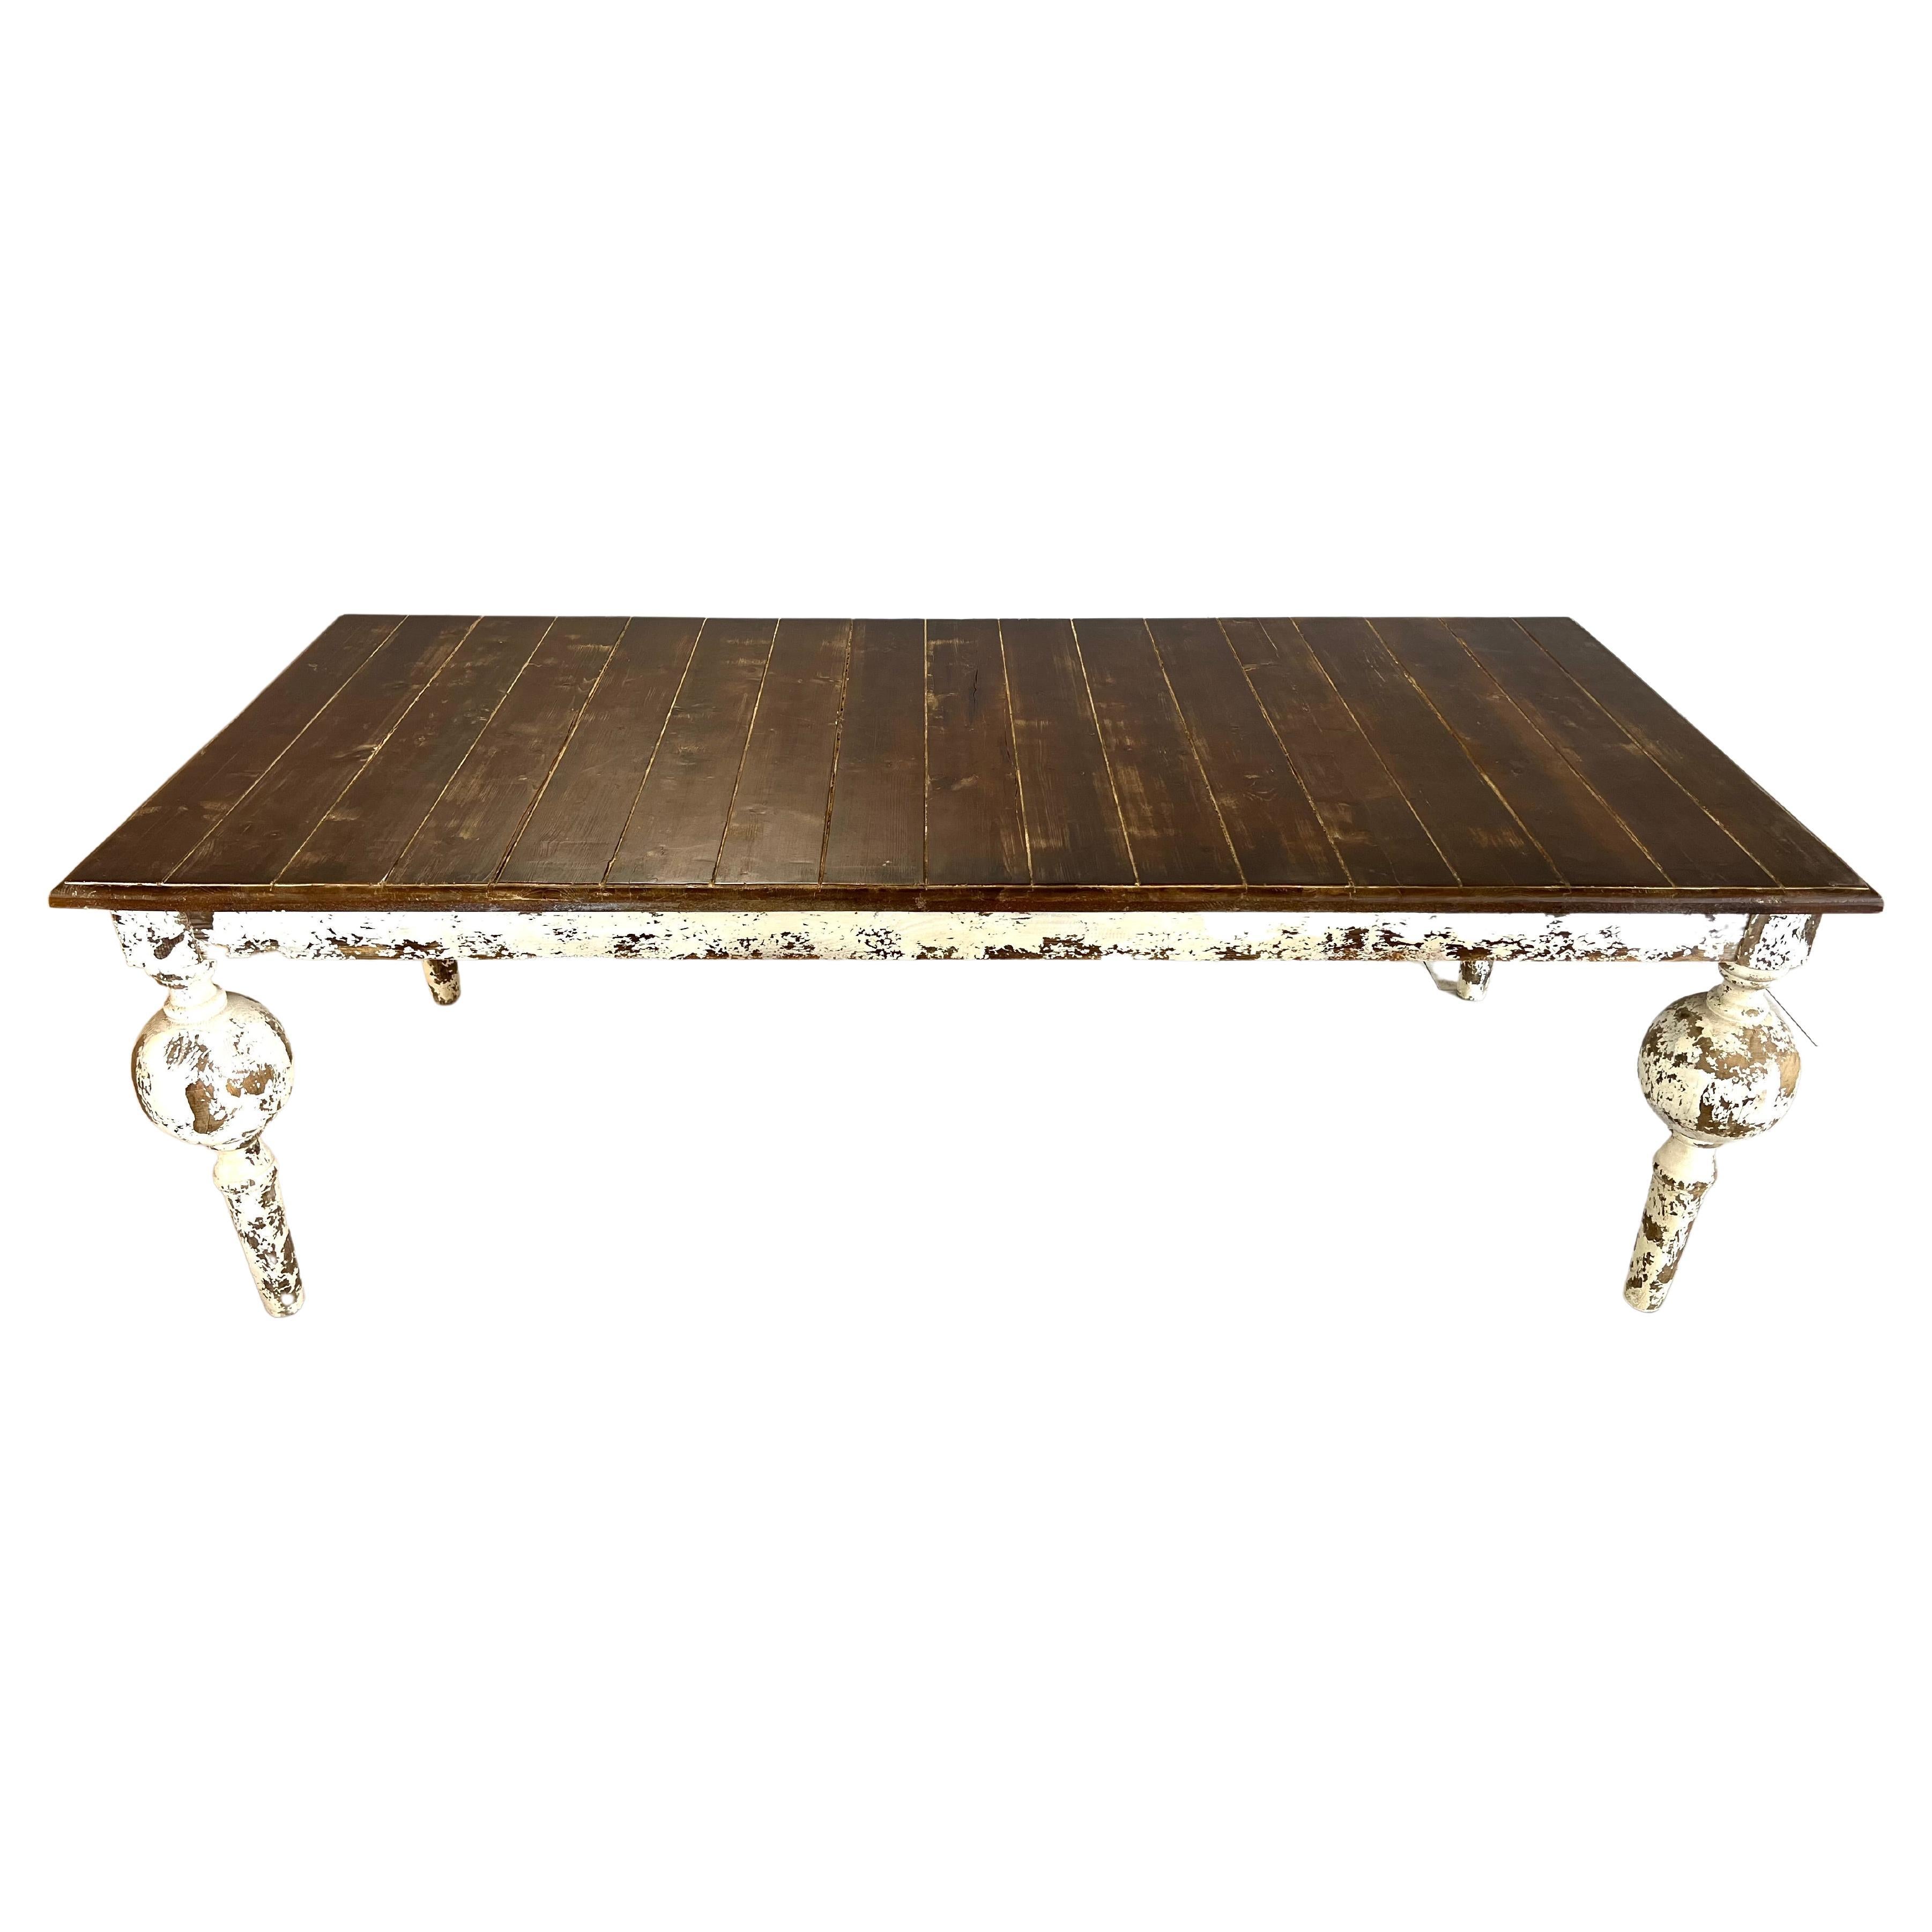 Victorian Farmhouse Whitewashed Distressed Wood Dining Table